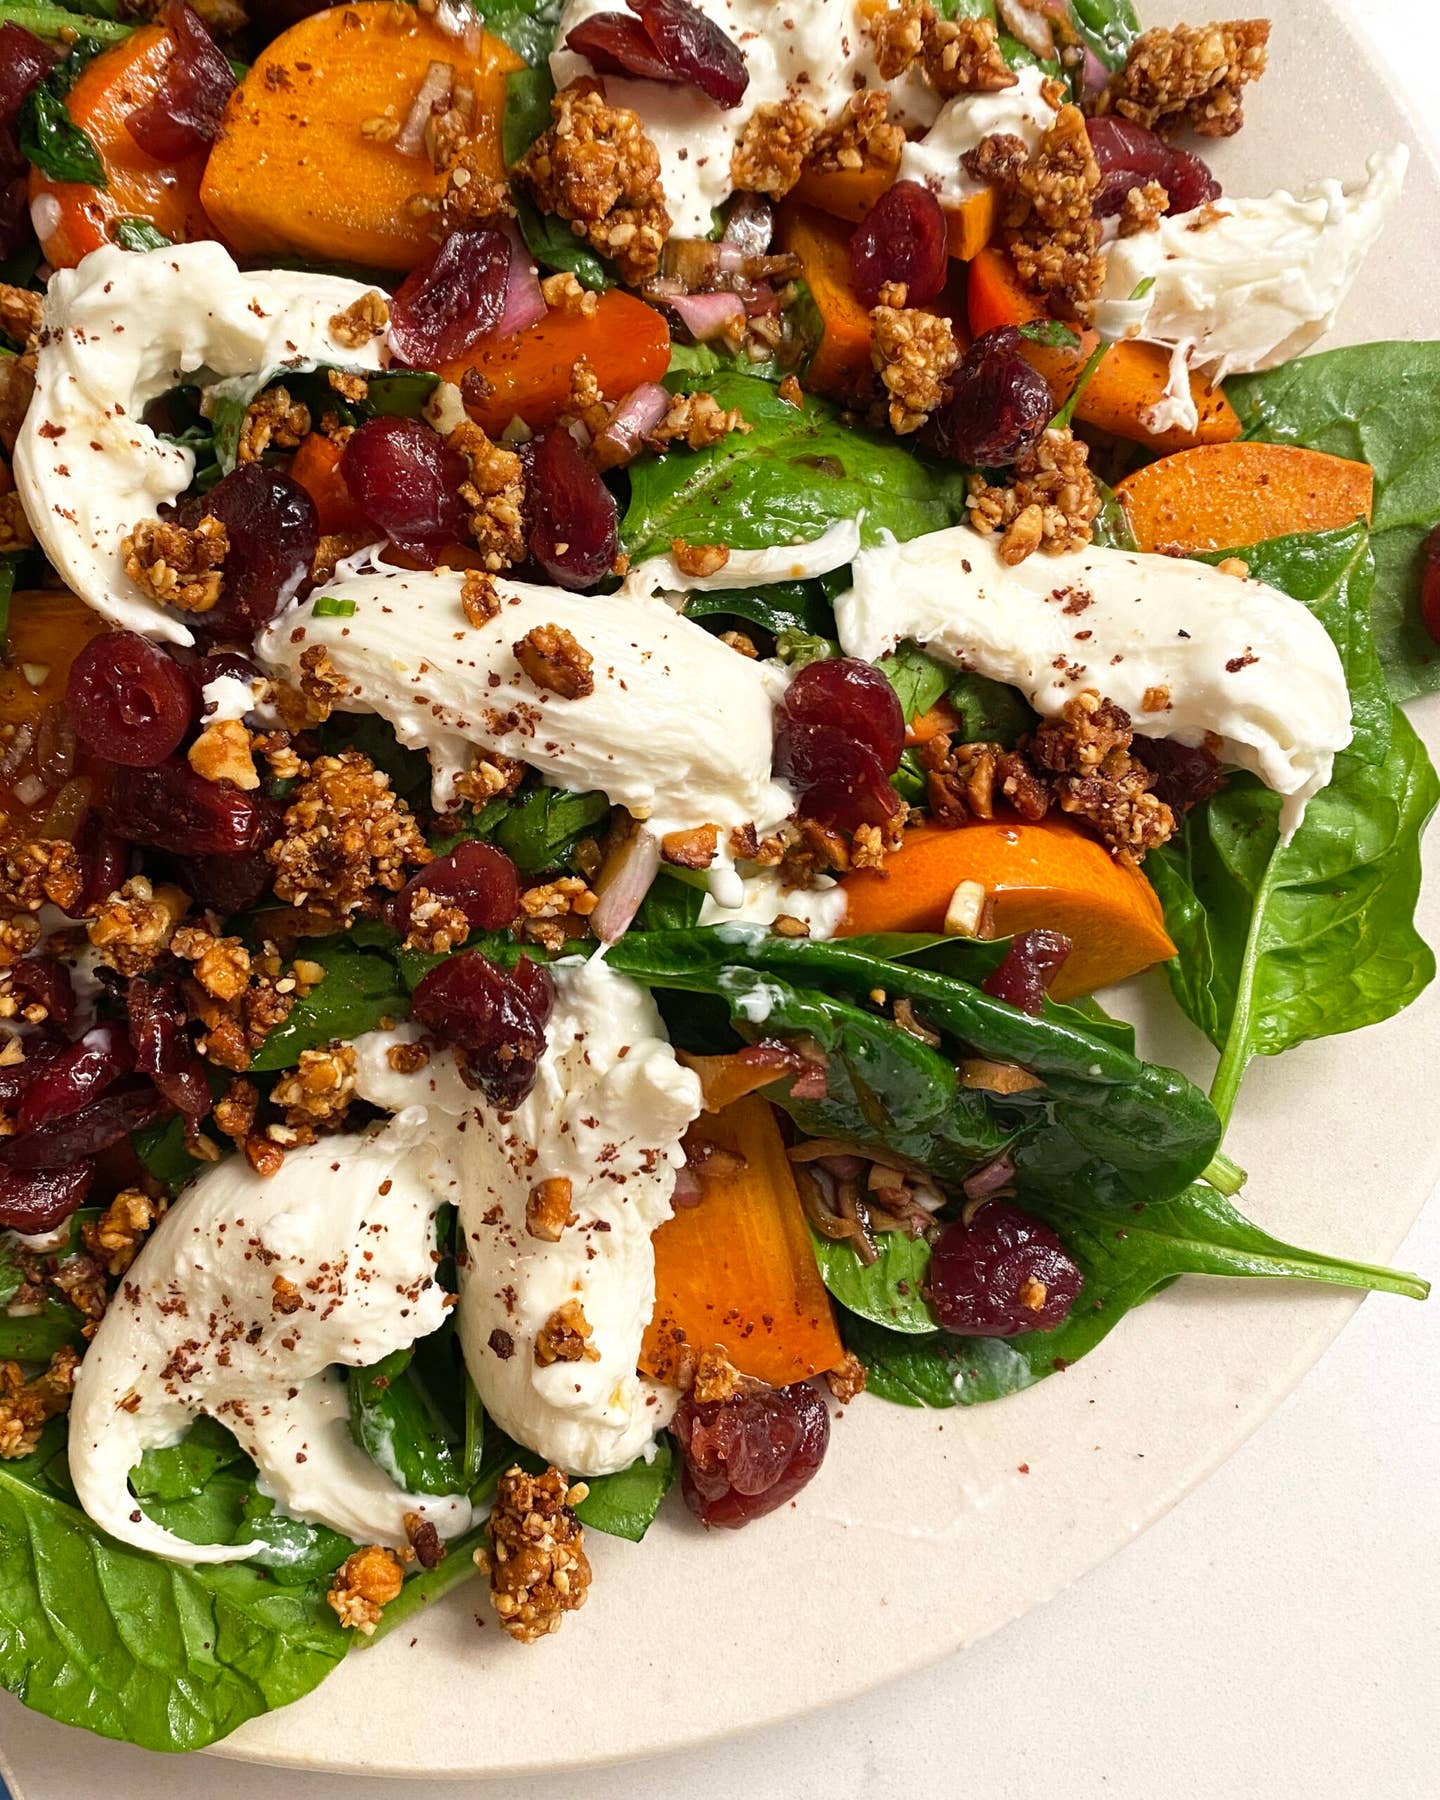 Fuyu Persimmons with Spinach, Burrata, and Cranberries